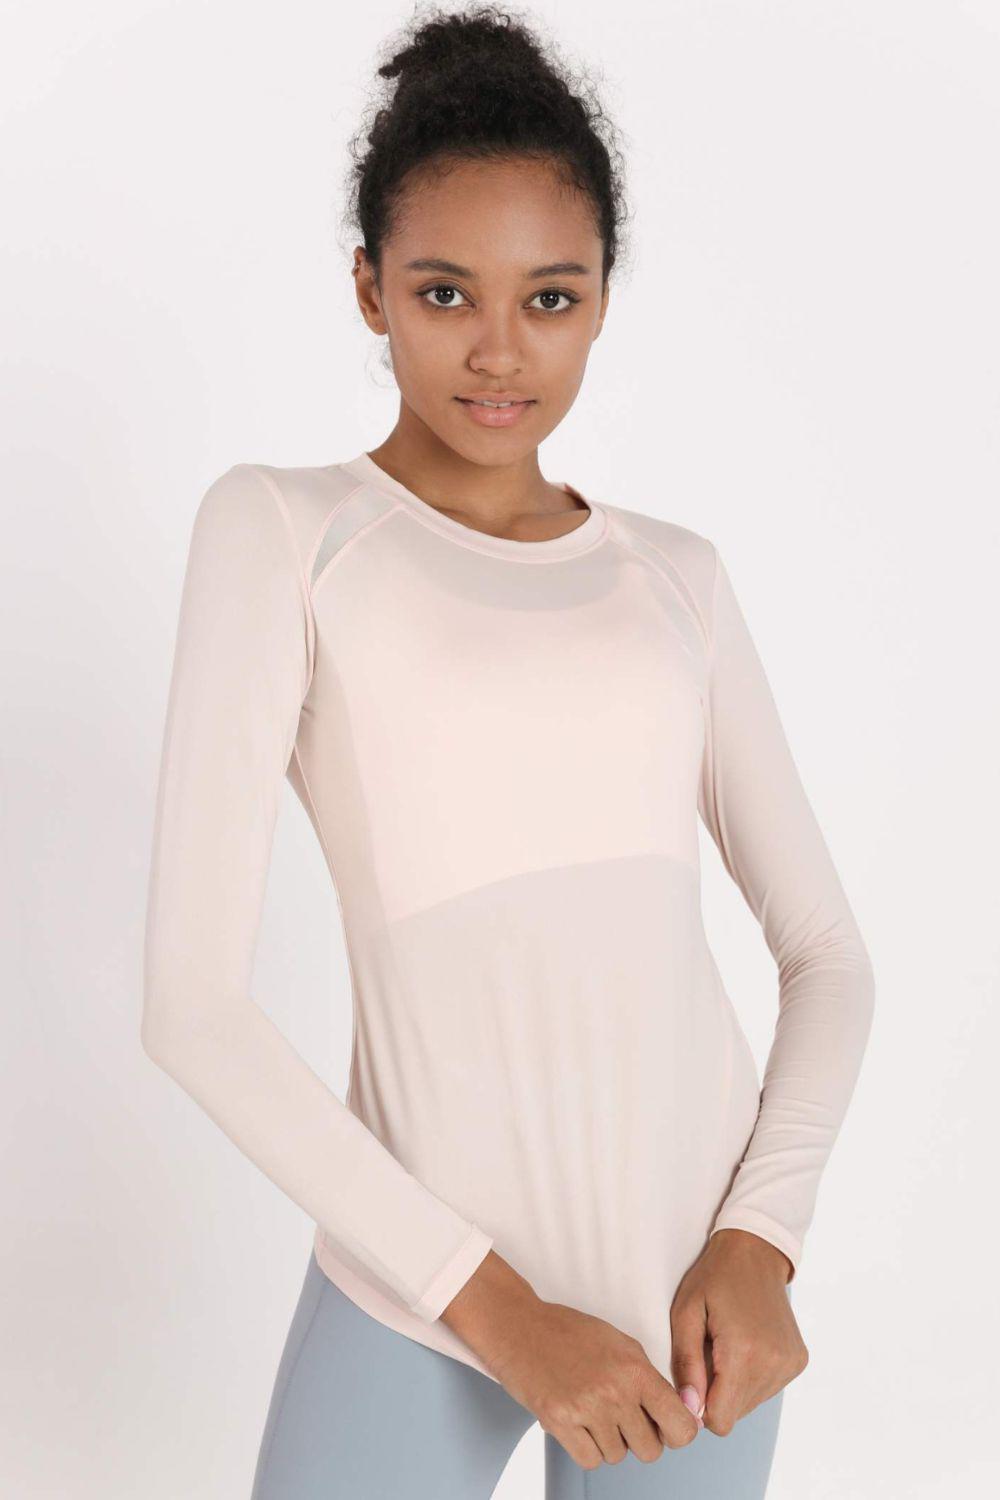 Quick-Dye Curved Hem Sports Top-TOPS / DRESSES-[Adult]-[Female]-Cream-S-2022 Online Blue Zone Planet